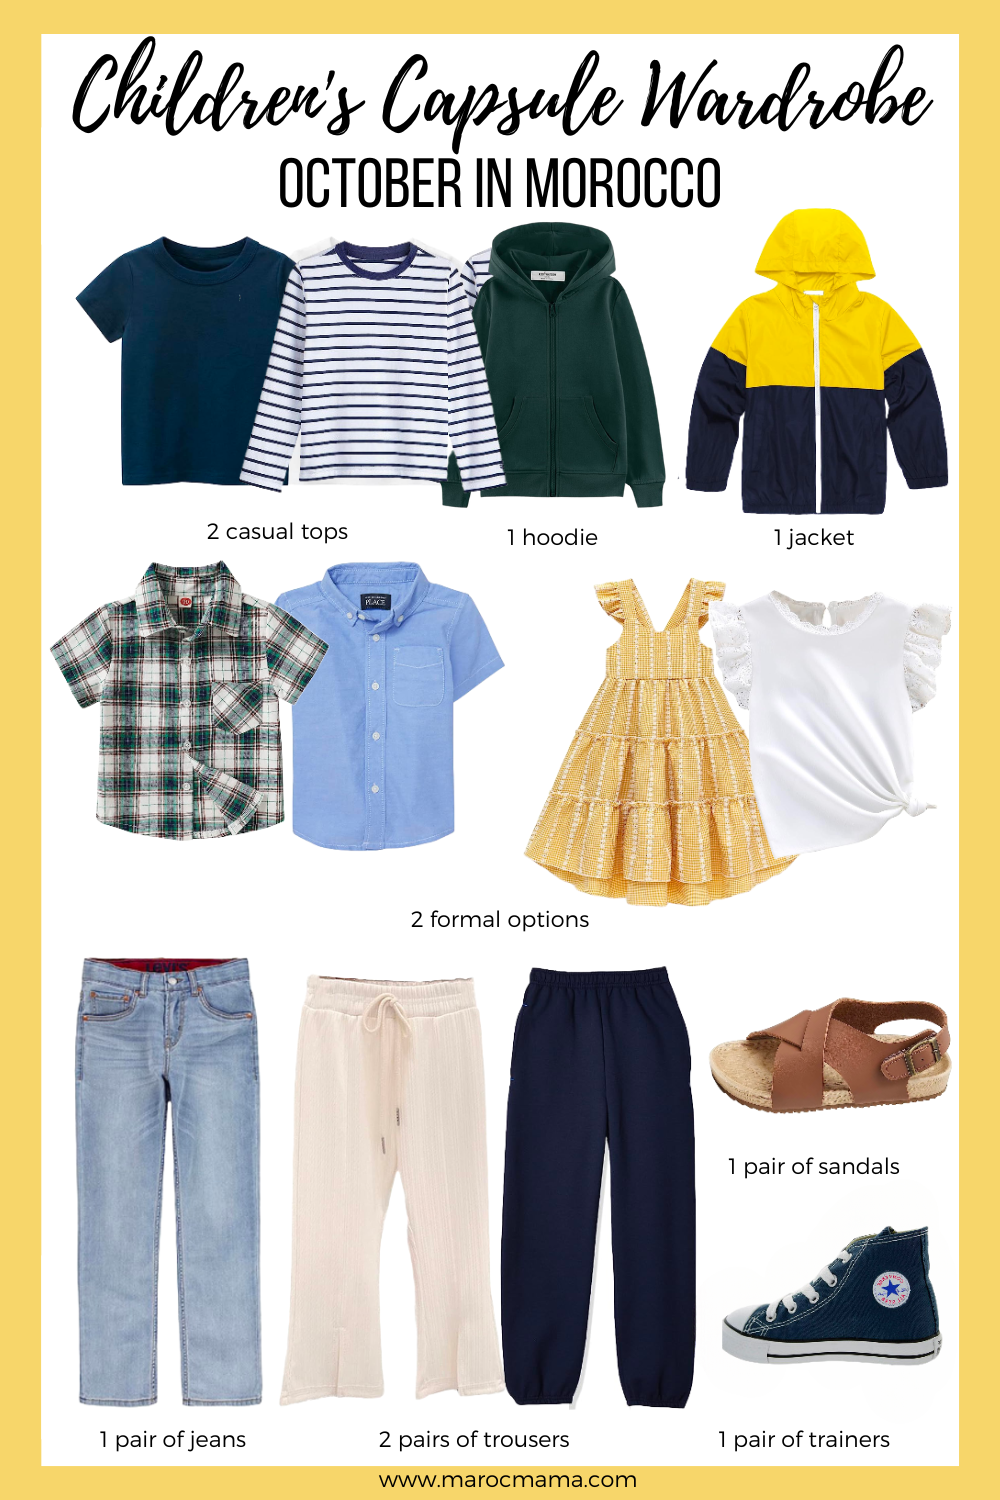 What to pack for kids in Morocco in October